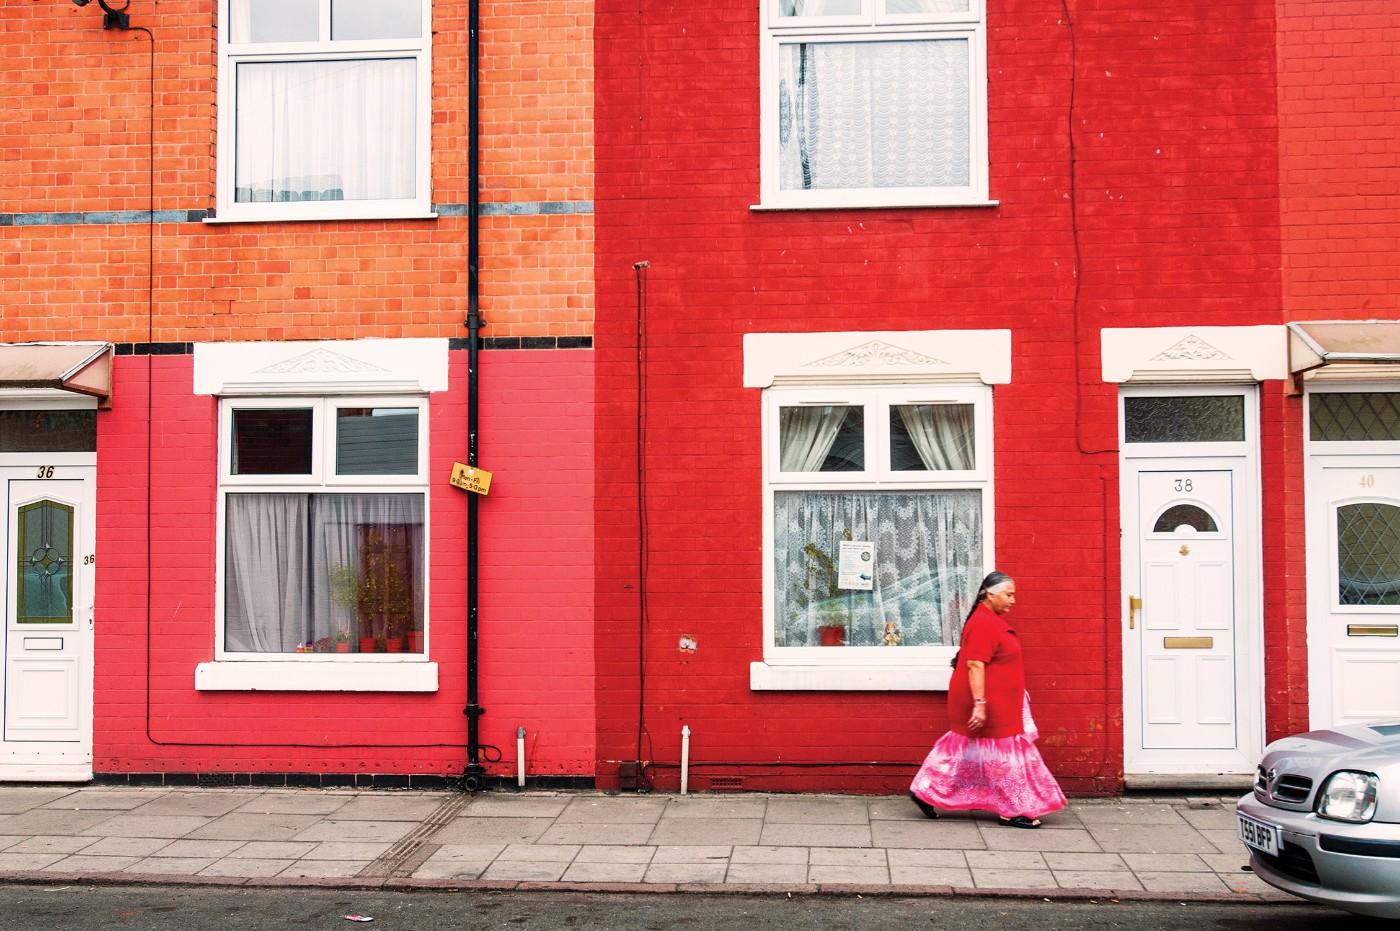 Pablo Bartholomew, "Gujarati Woman in a Saree Walks Past Red Brick Homes in her Neighborhood, Leicester, UK," 2011